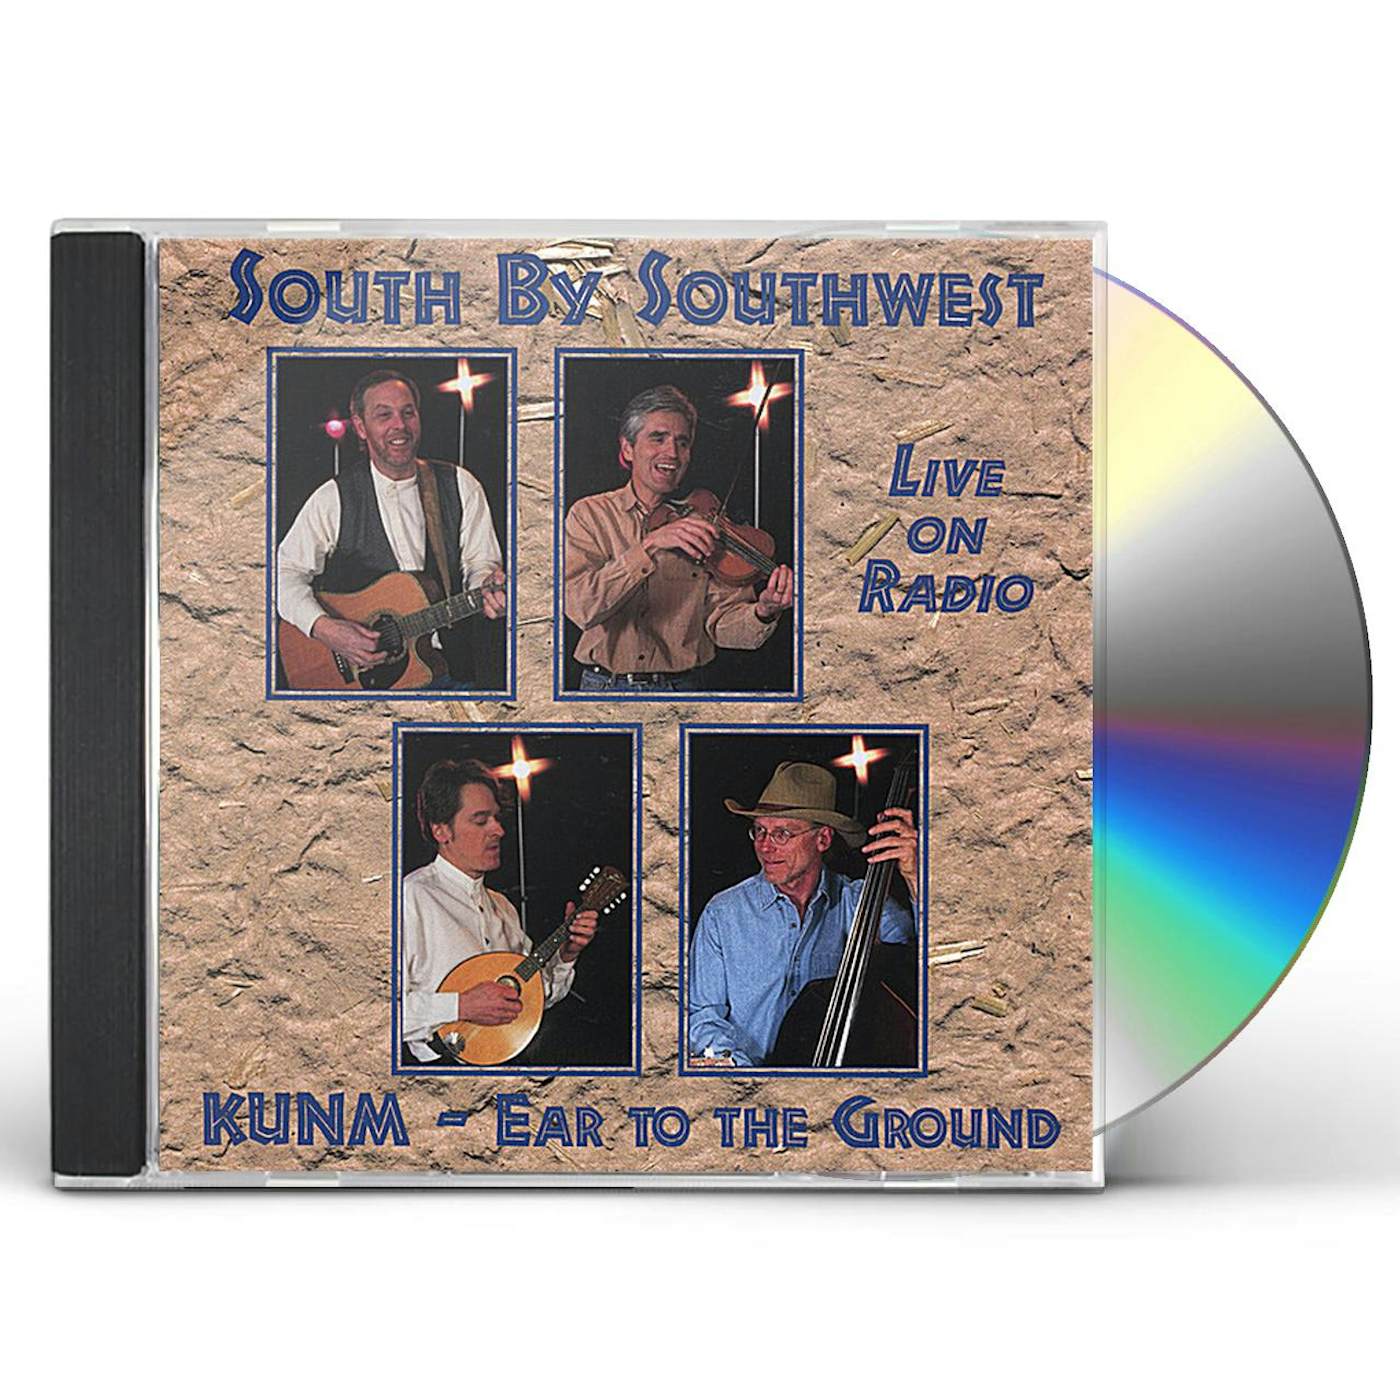 South By Southwest LIVE ON RADIO CD